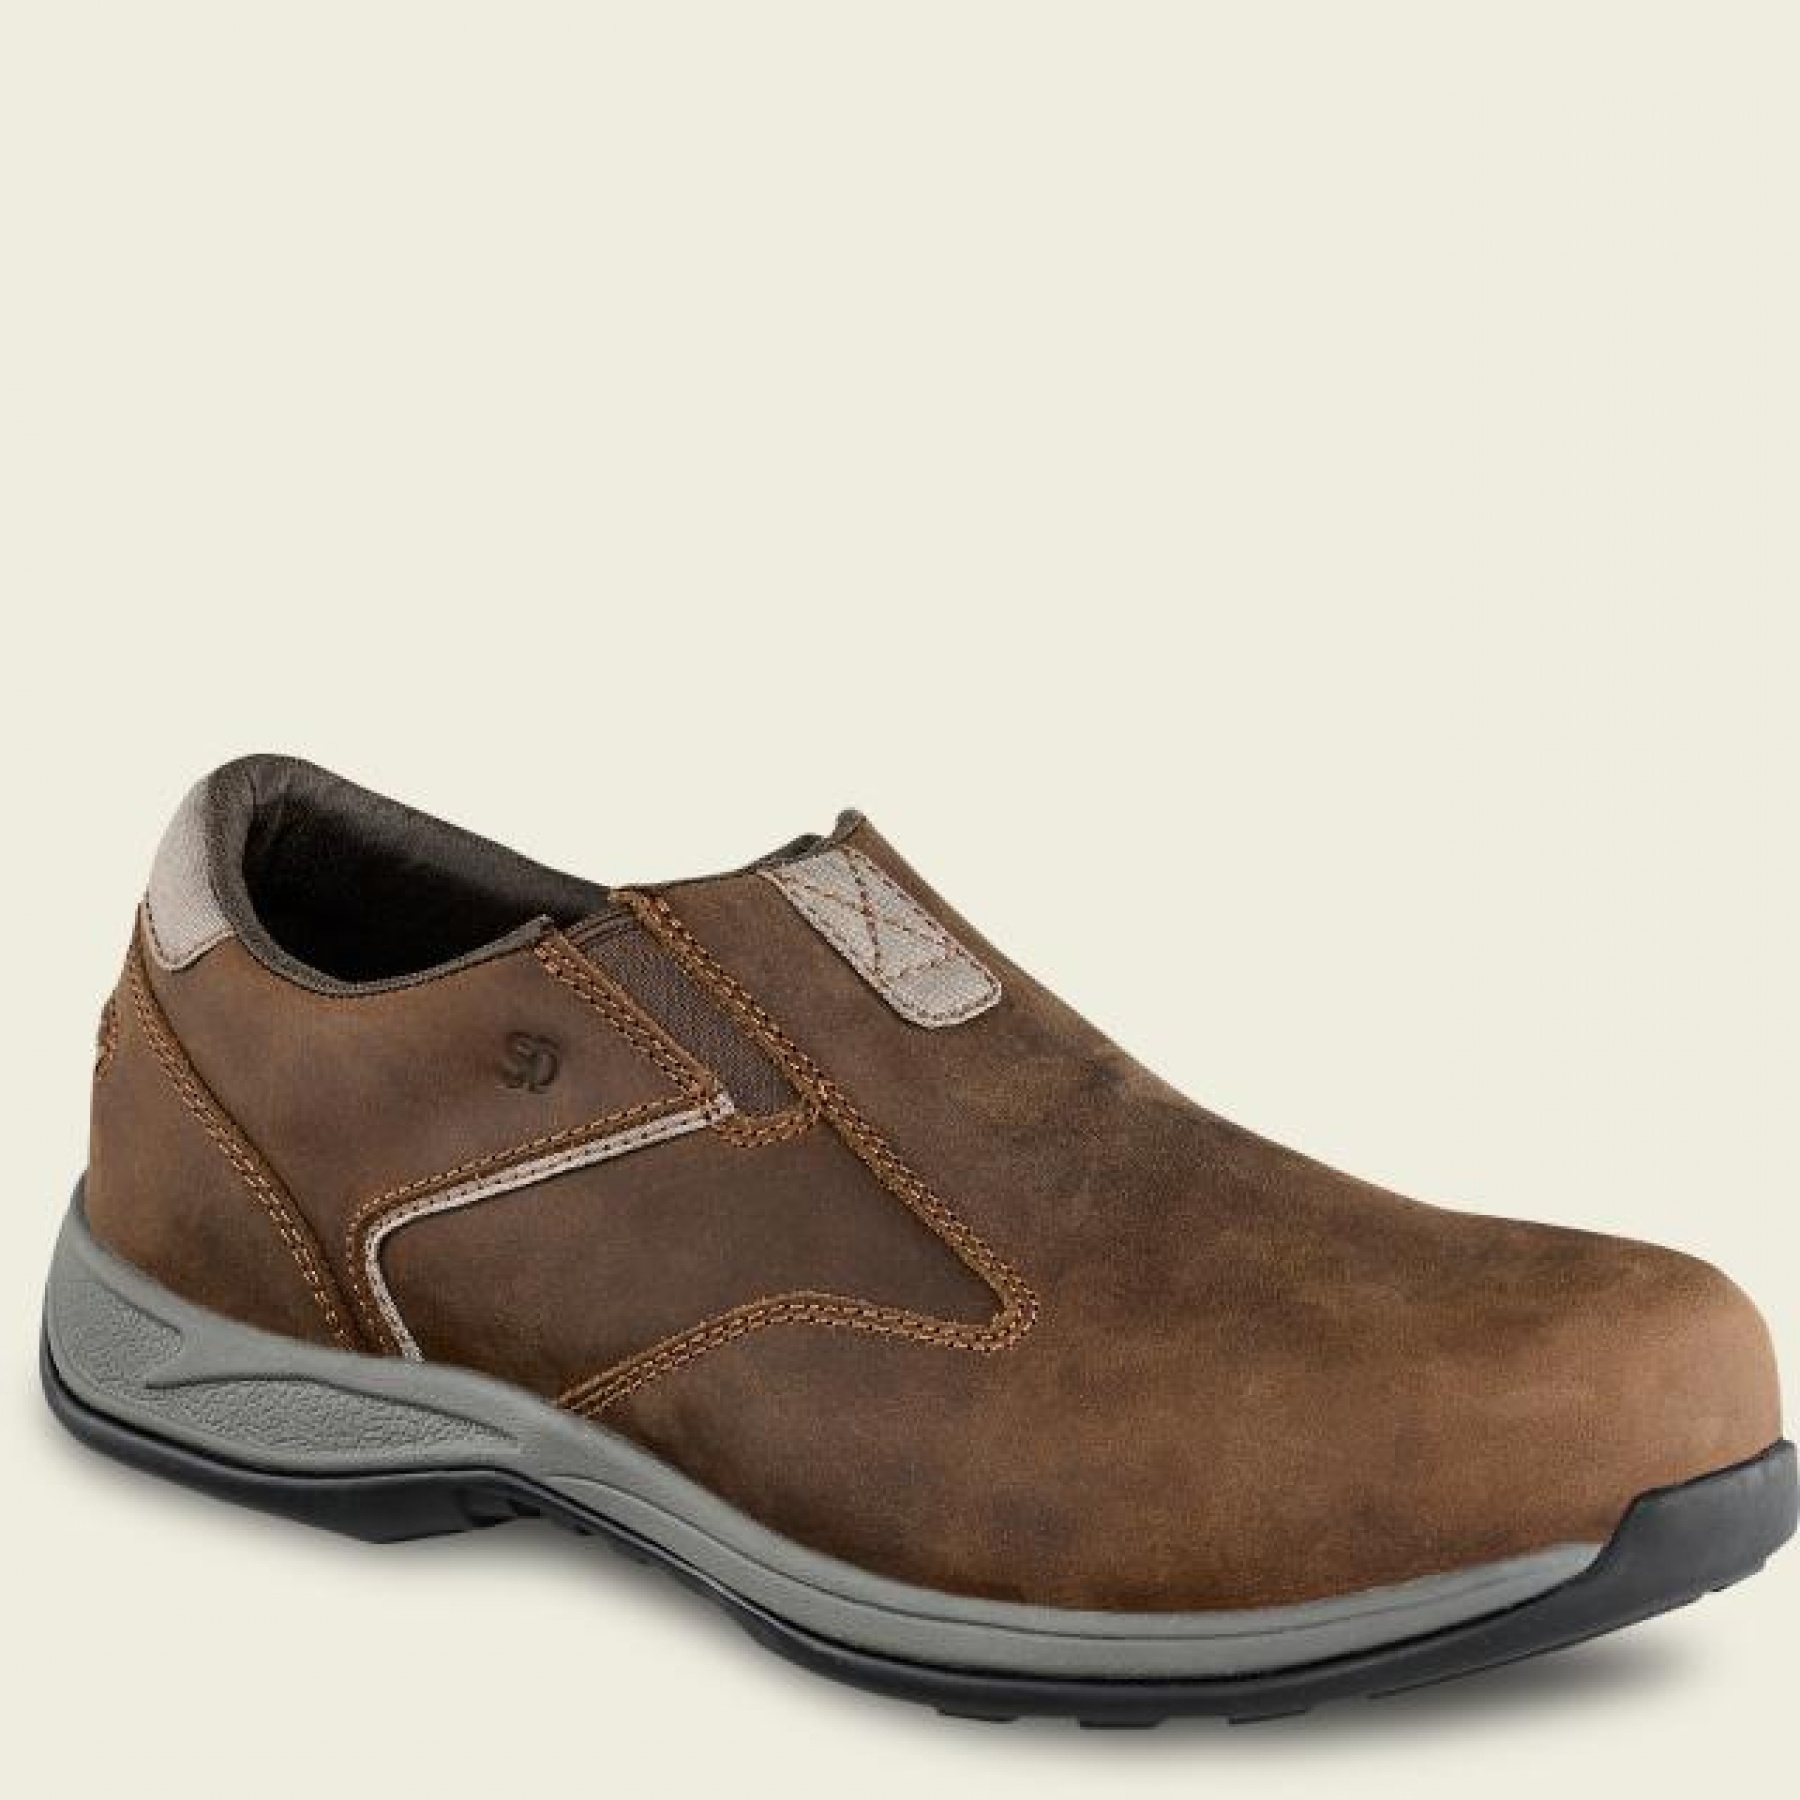 Buy Red Wing Slip-On Safety Shoes | Gents Footwear, Safety ...